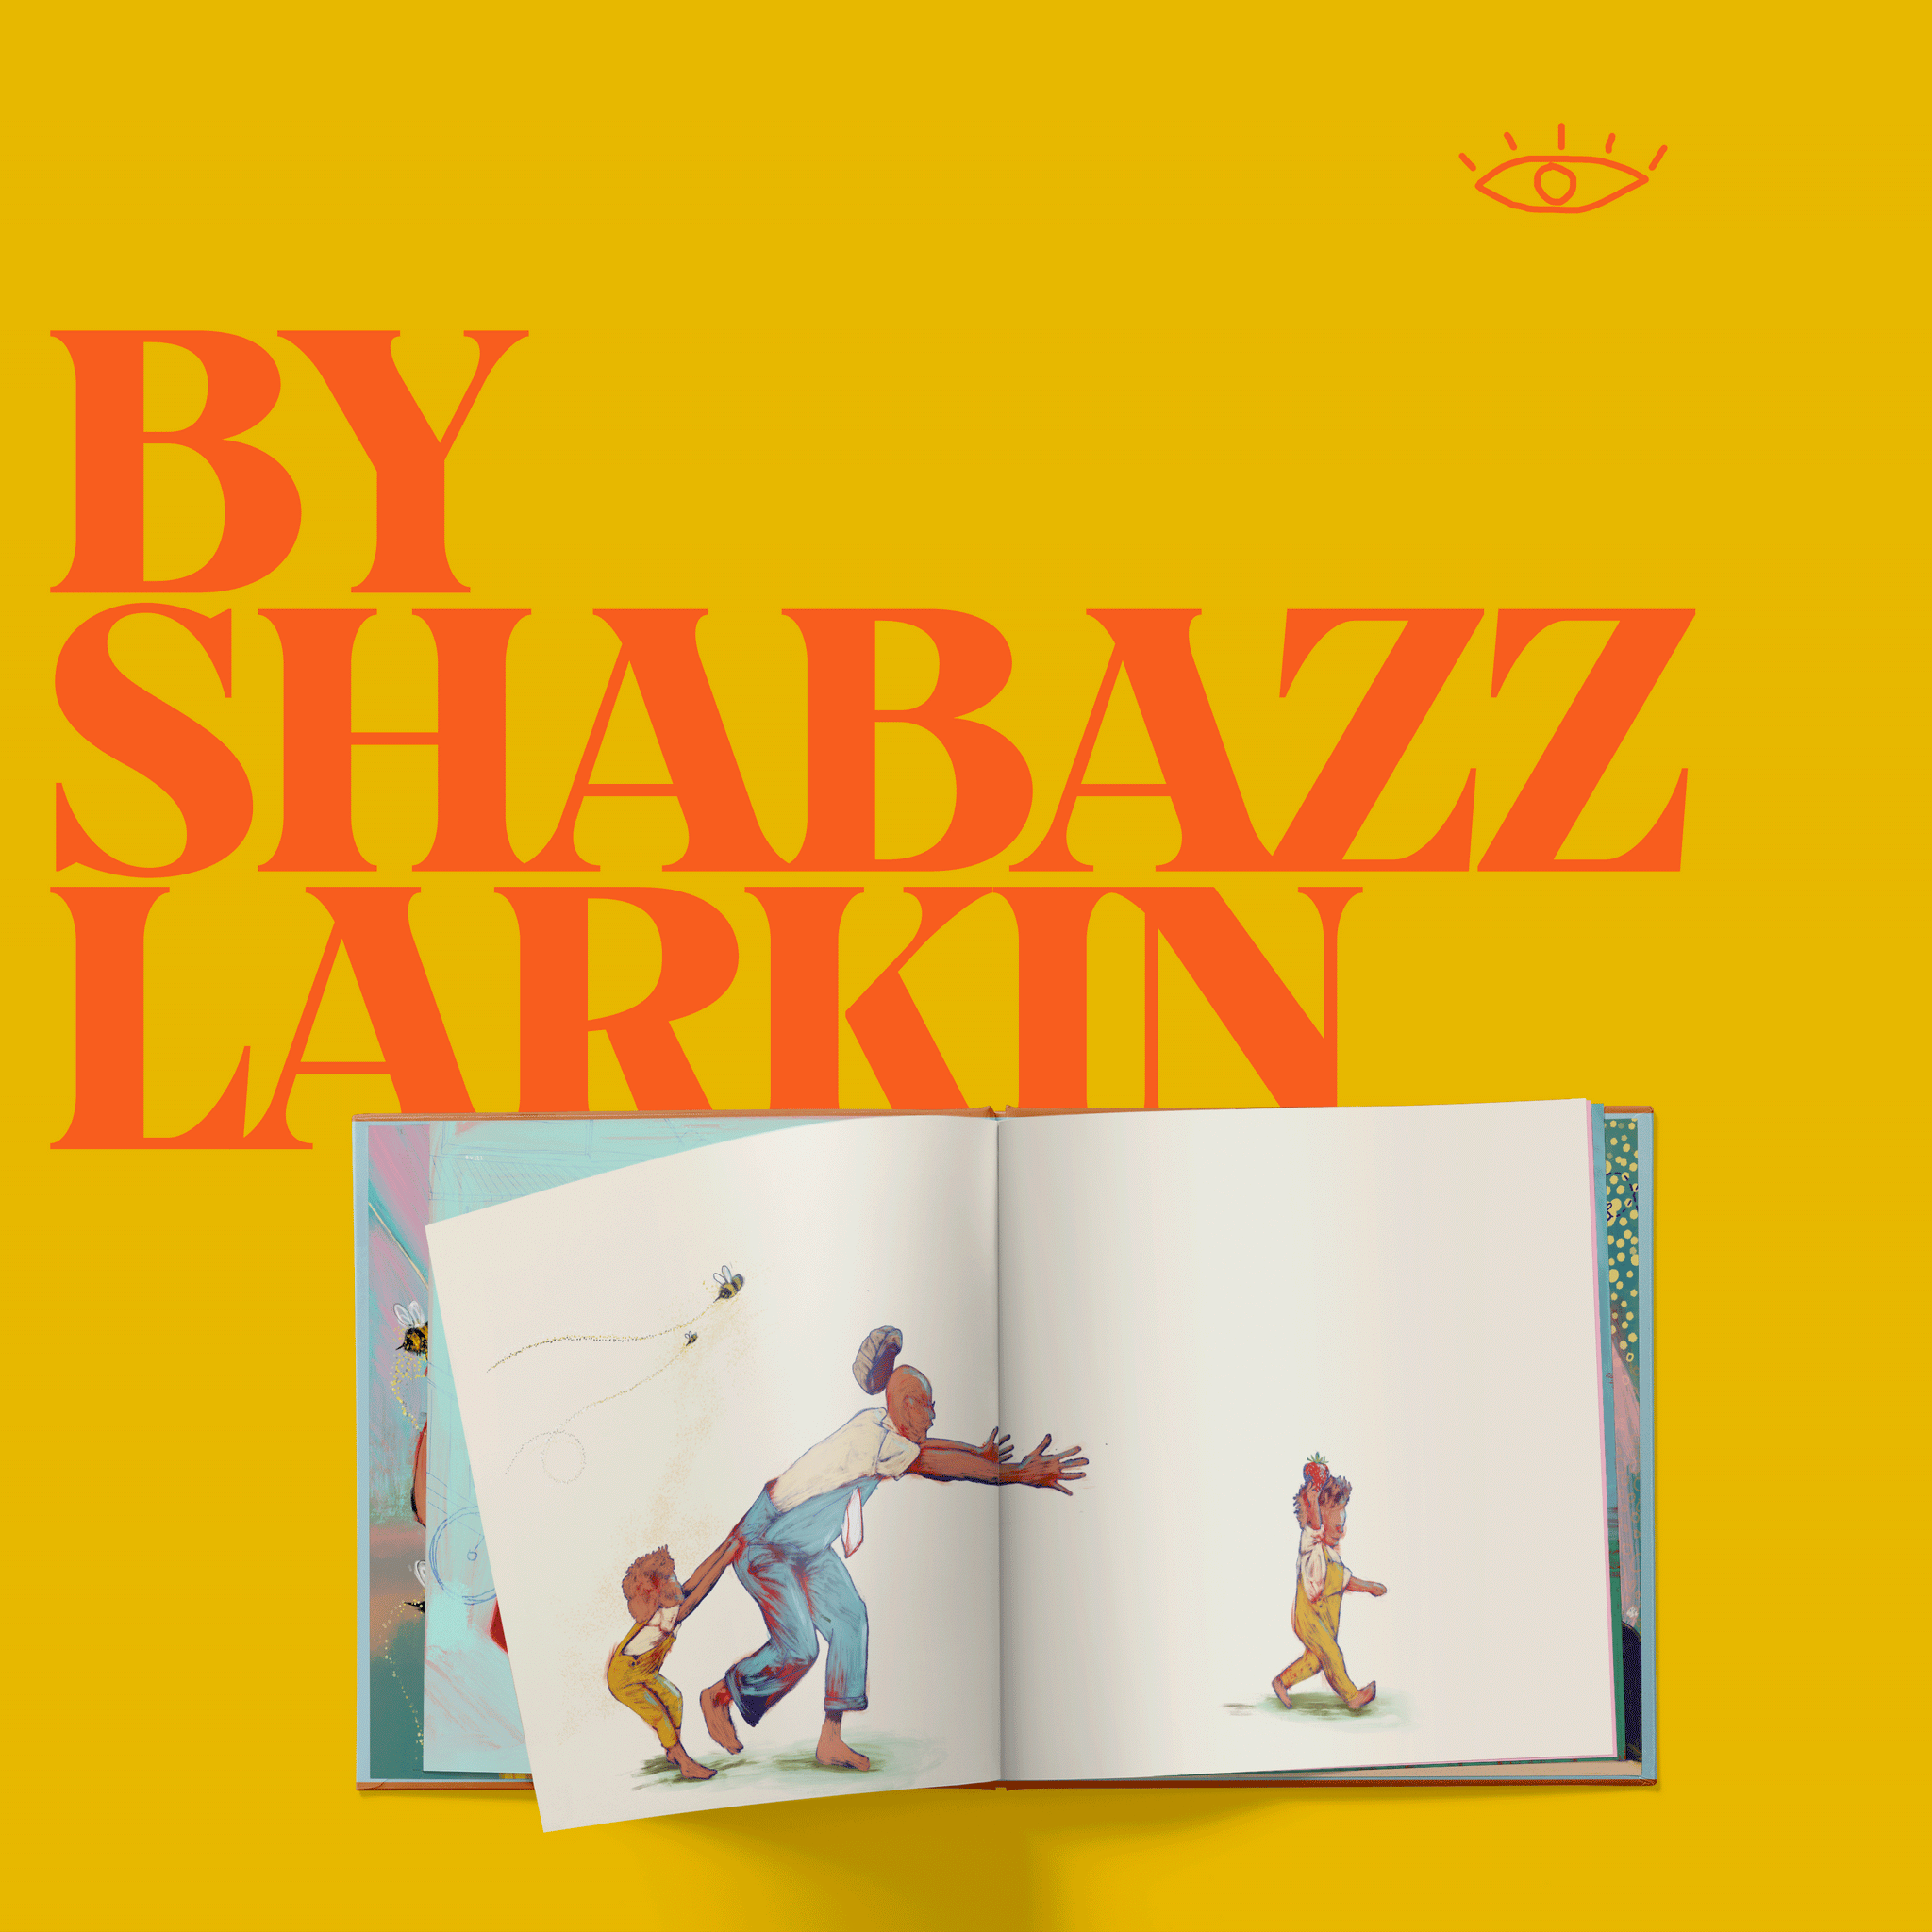 The Thing About Bees by Shabazz Larkin